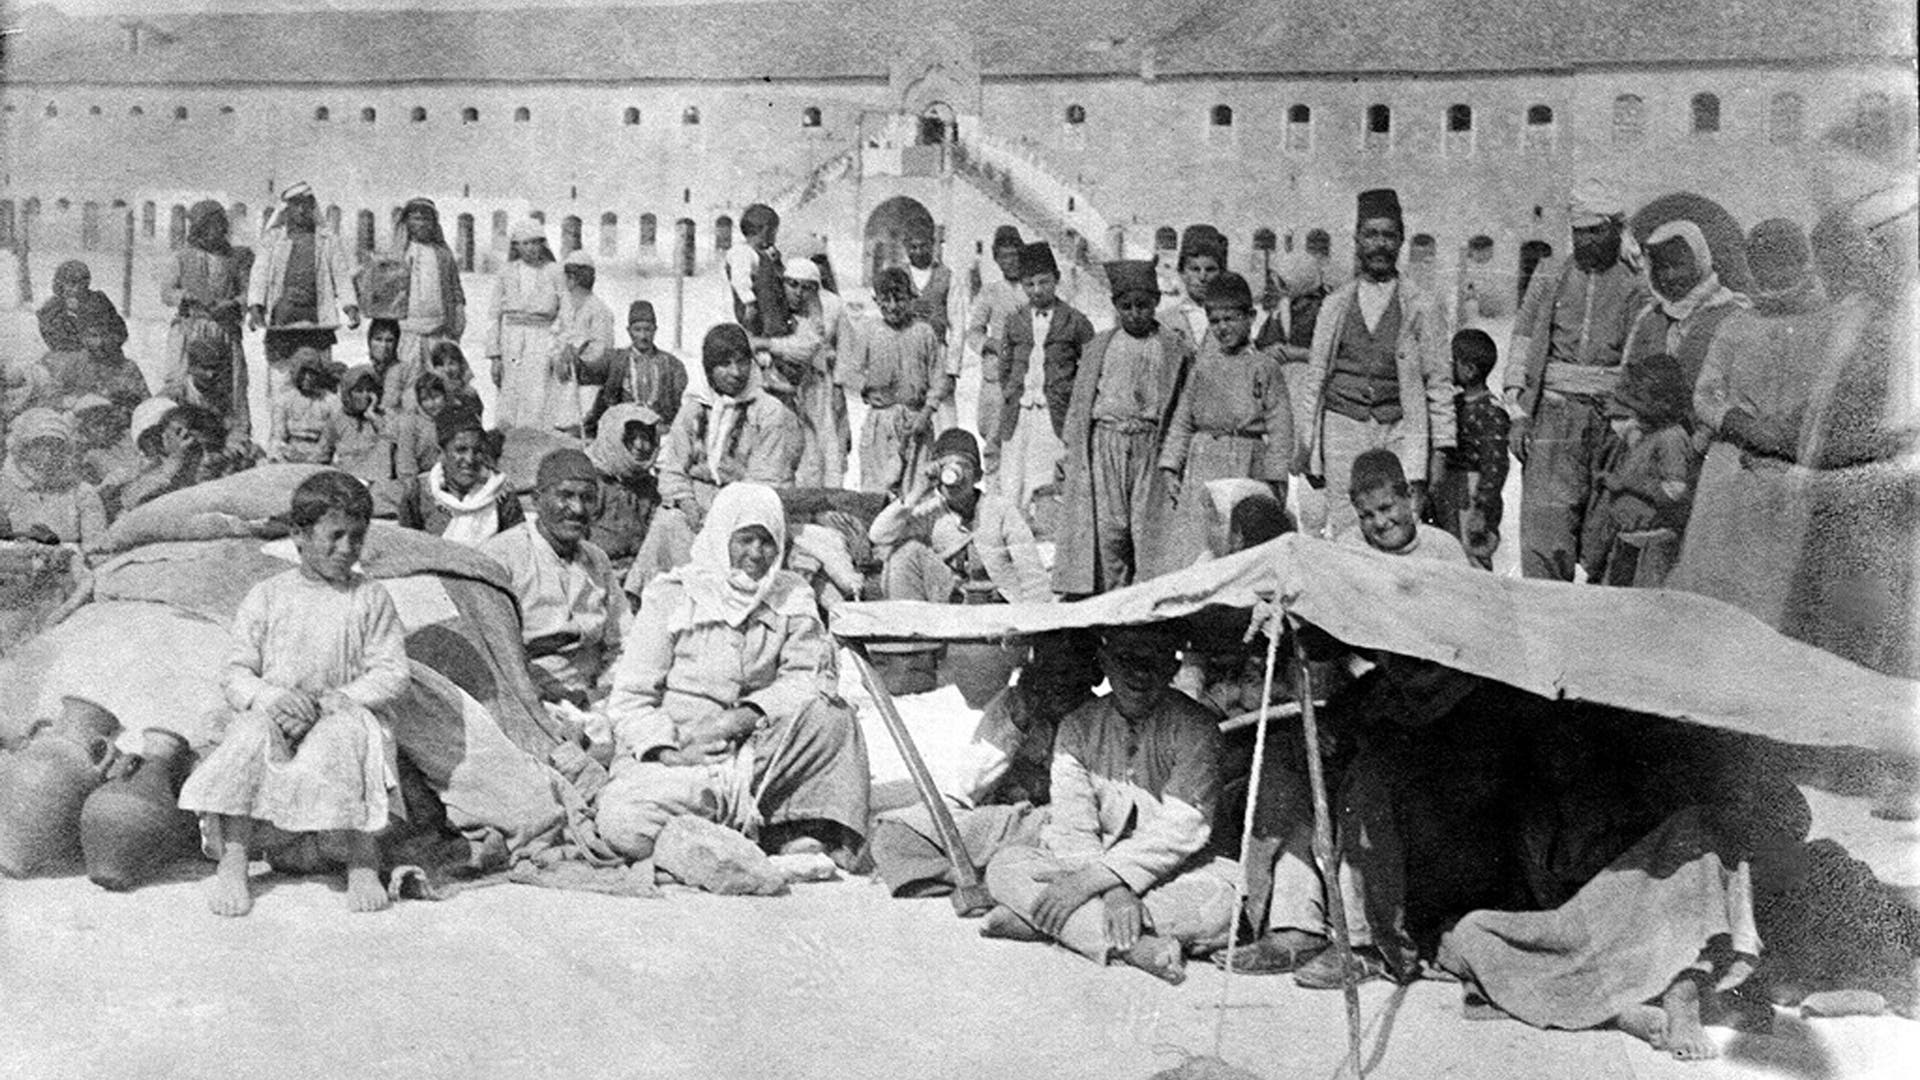 Armenian Genocide, survivors gathered in the barracks at Aleppo, c1918.The Armenian Genocide refers to the deliberate and systematic destruction of the Armenian population of the Ottoman Empire during and just after World War I. It was implemented through wholesale massacres and deportations, with the deportations consisting of forced marches under conditions designed to lead to the death of the deportees. The total number of resulting Armenian deaths is generally held to have been between one and one and a half million. Other ethnic groups were similarly attacked by the Ottoman Empire during this period, including Assyrians and Greeks, and some scholars consider those events to be part of the same policy of extermination. It is widely acknowledged to have been one of the first modern genocides, as scholars point to the systematic, organized manner in which the killings were carried out to eliminate the Armenians, and it is the second most-studied case of genocide after the Holocaust. The word genocide was coined in order to describe these events. (Photo by: Pictures From History/Universal Images Group via Getty Images)